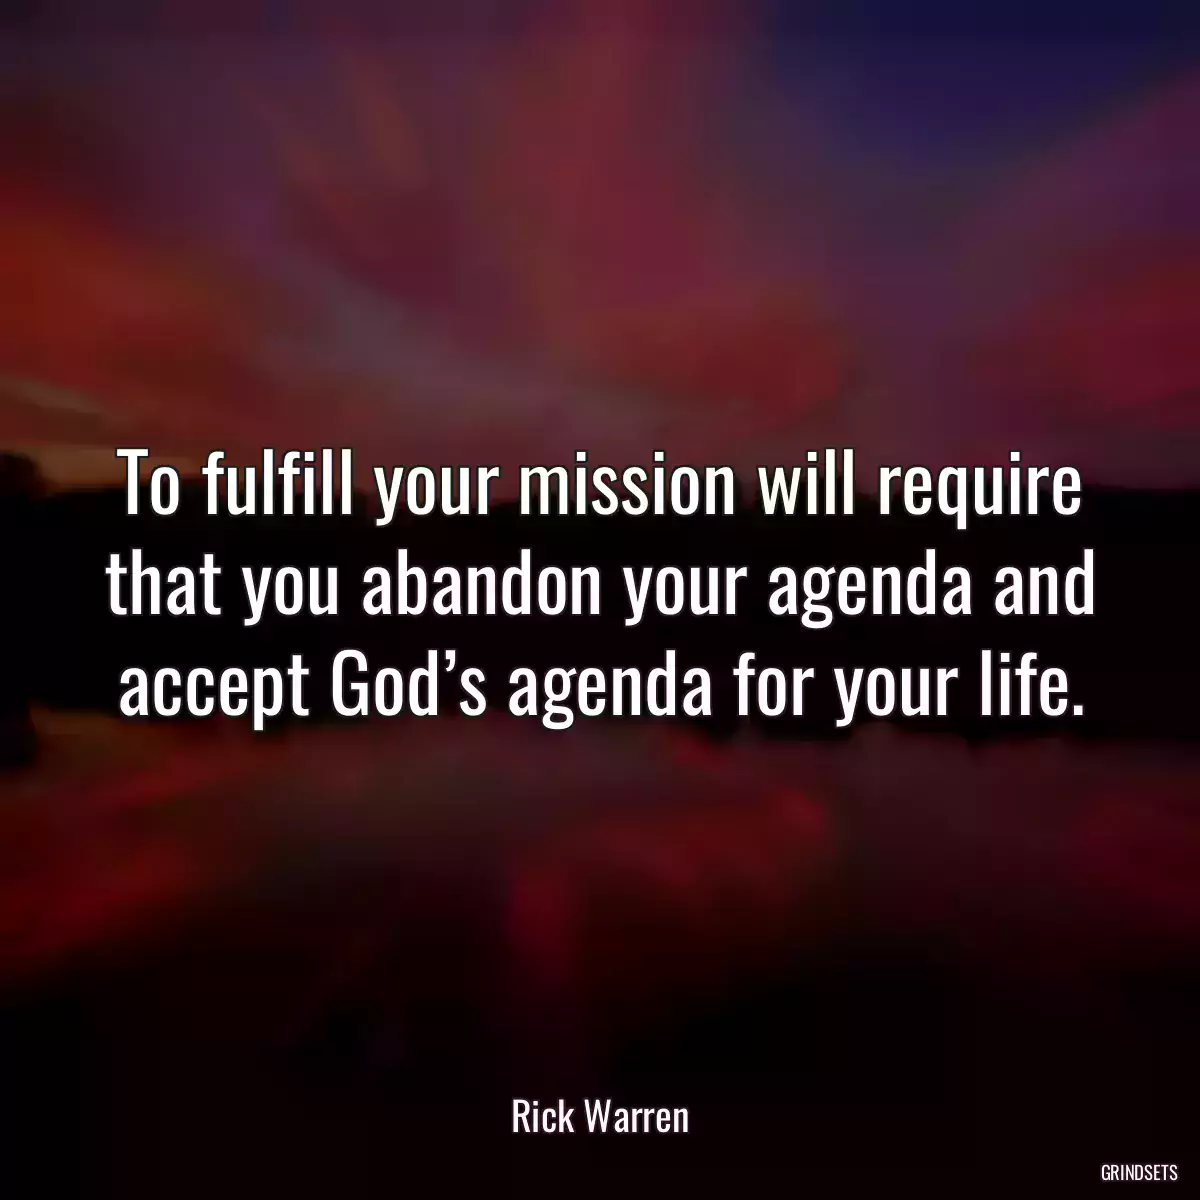 To fulfill your mission will require that you abandon your agenda and accept God’s agenda for your life.